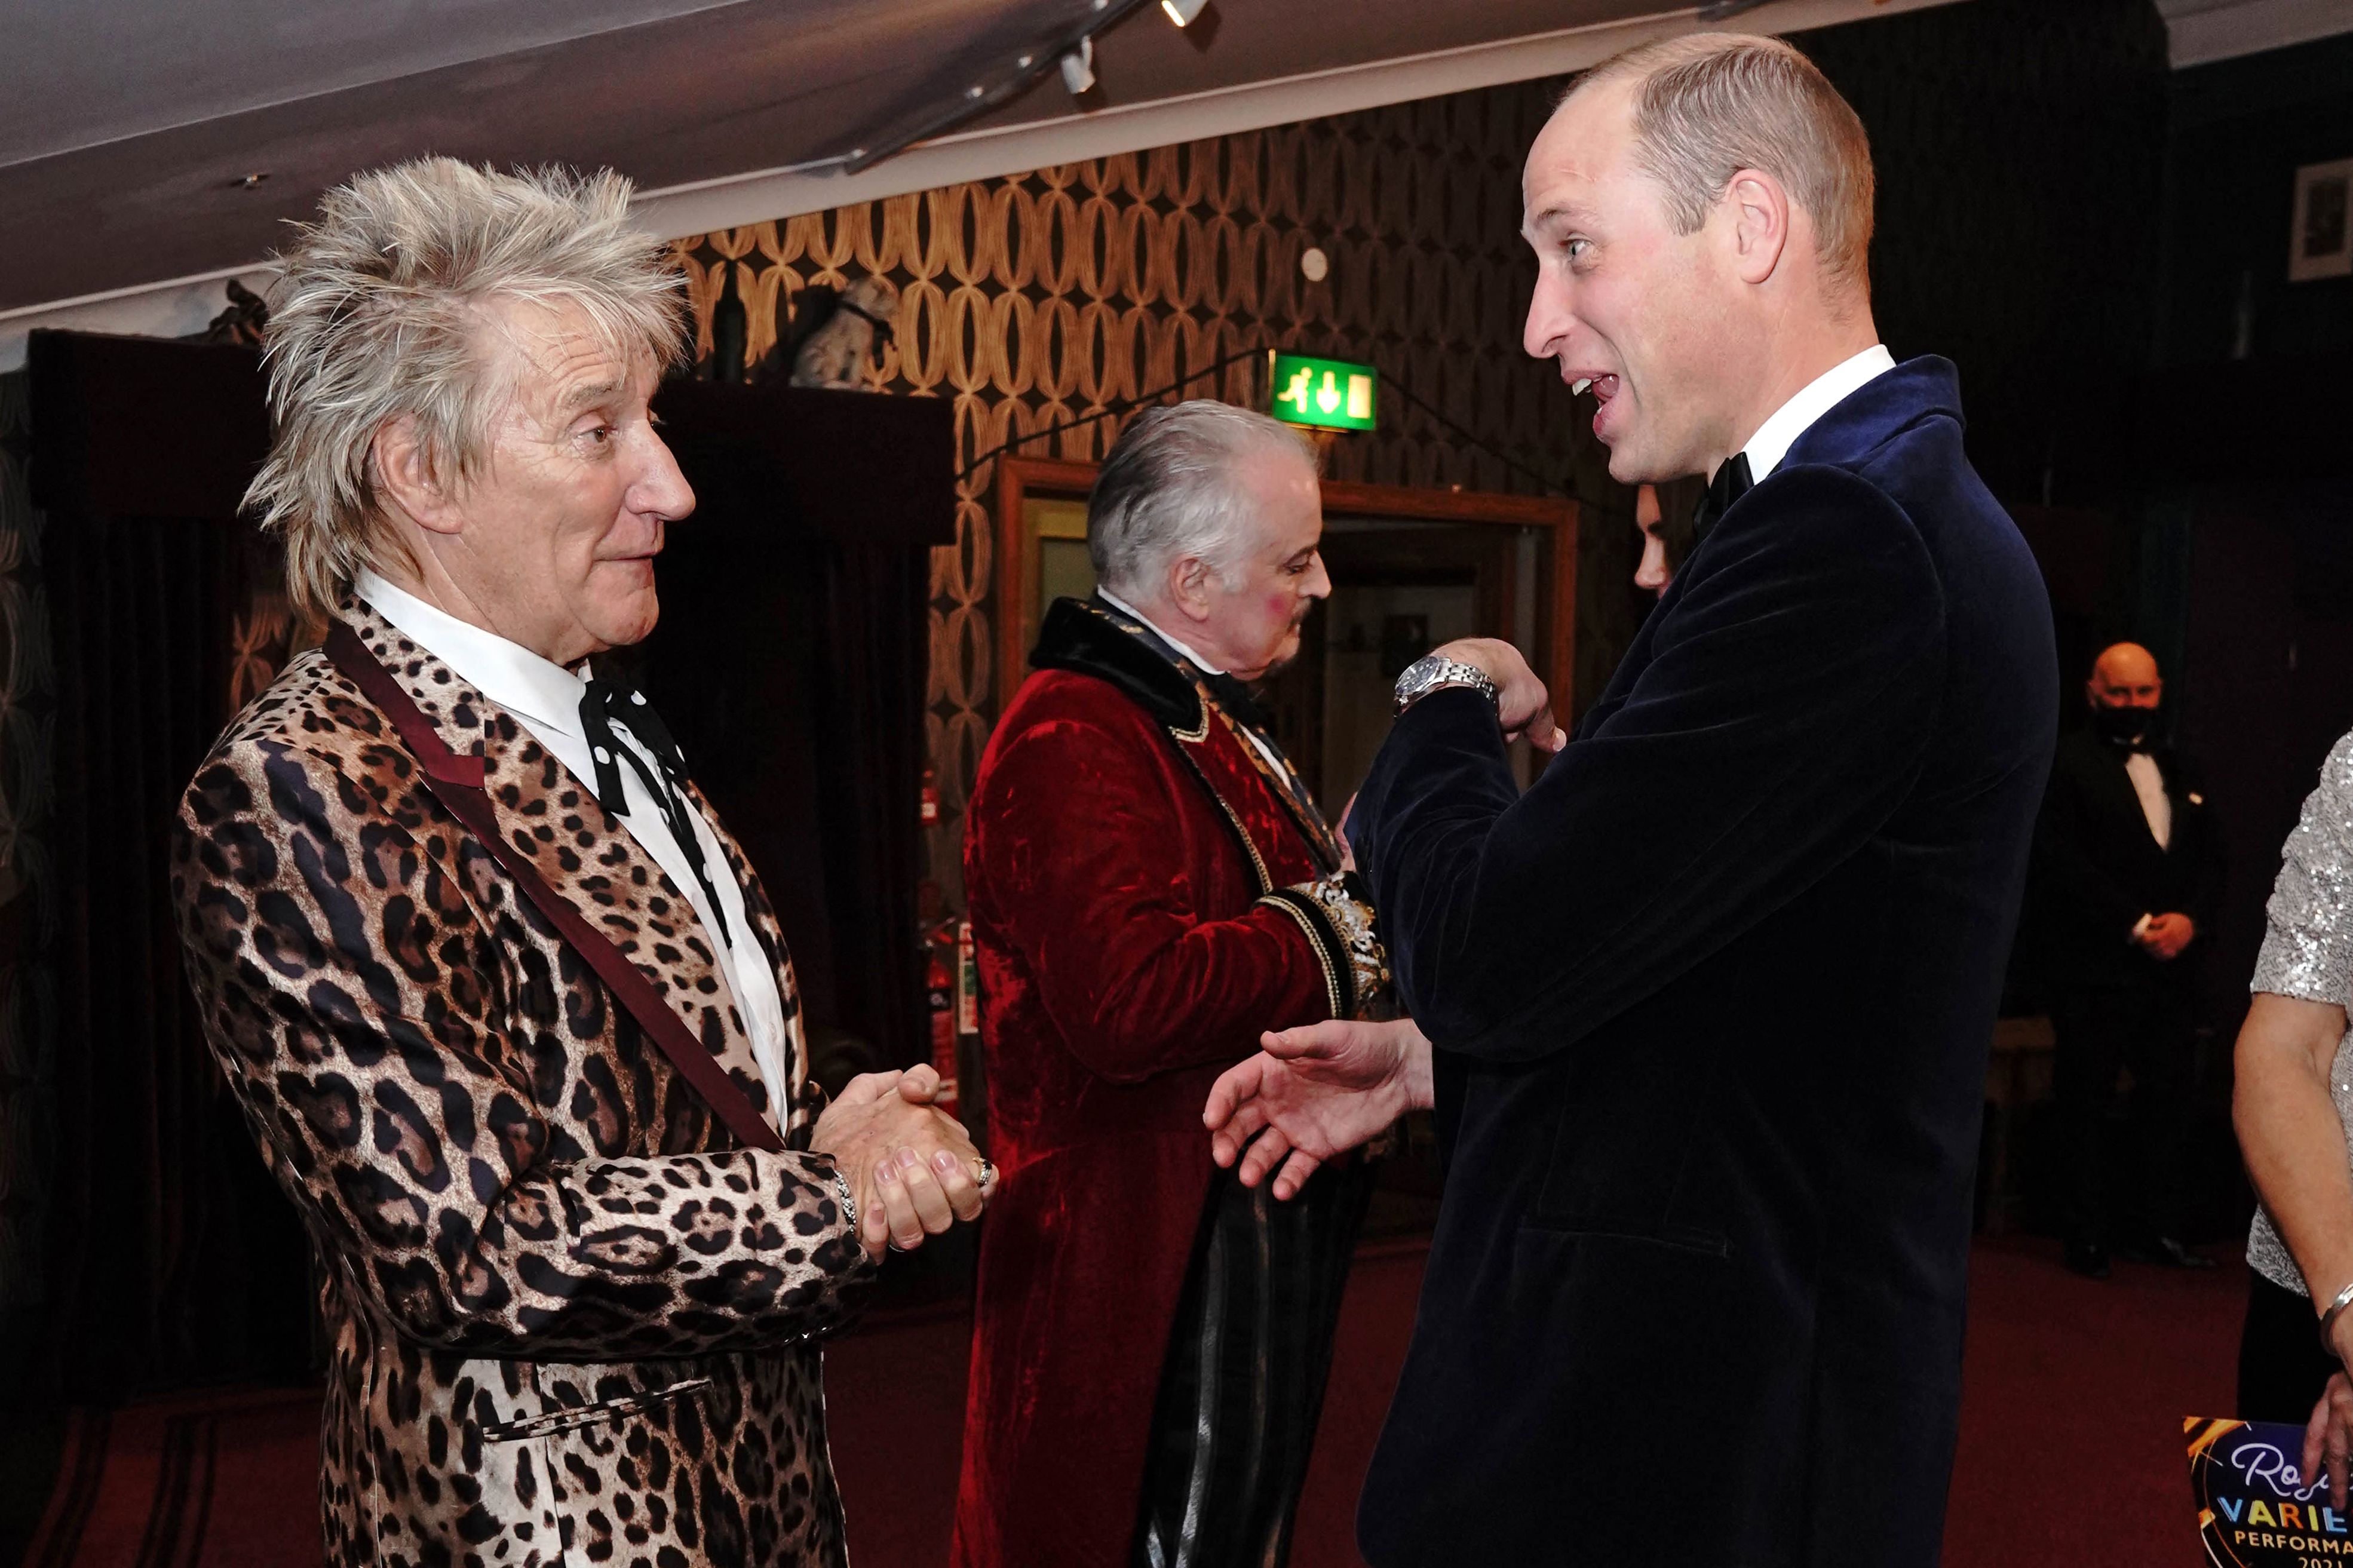 Prince William and Rod Stewart Had a Royal Outfit Battle